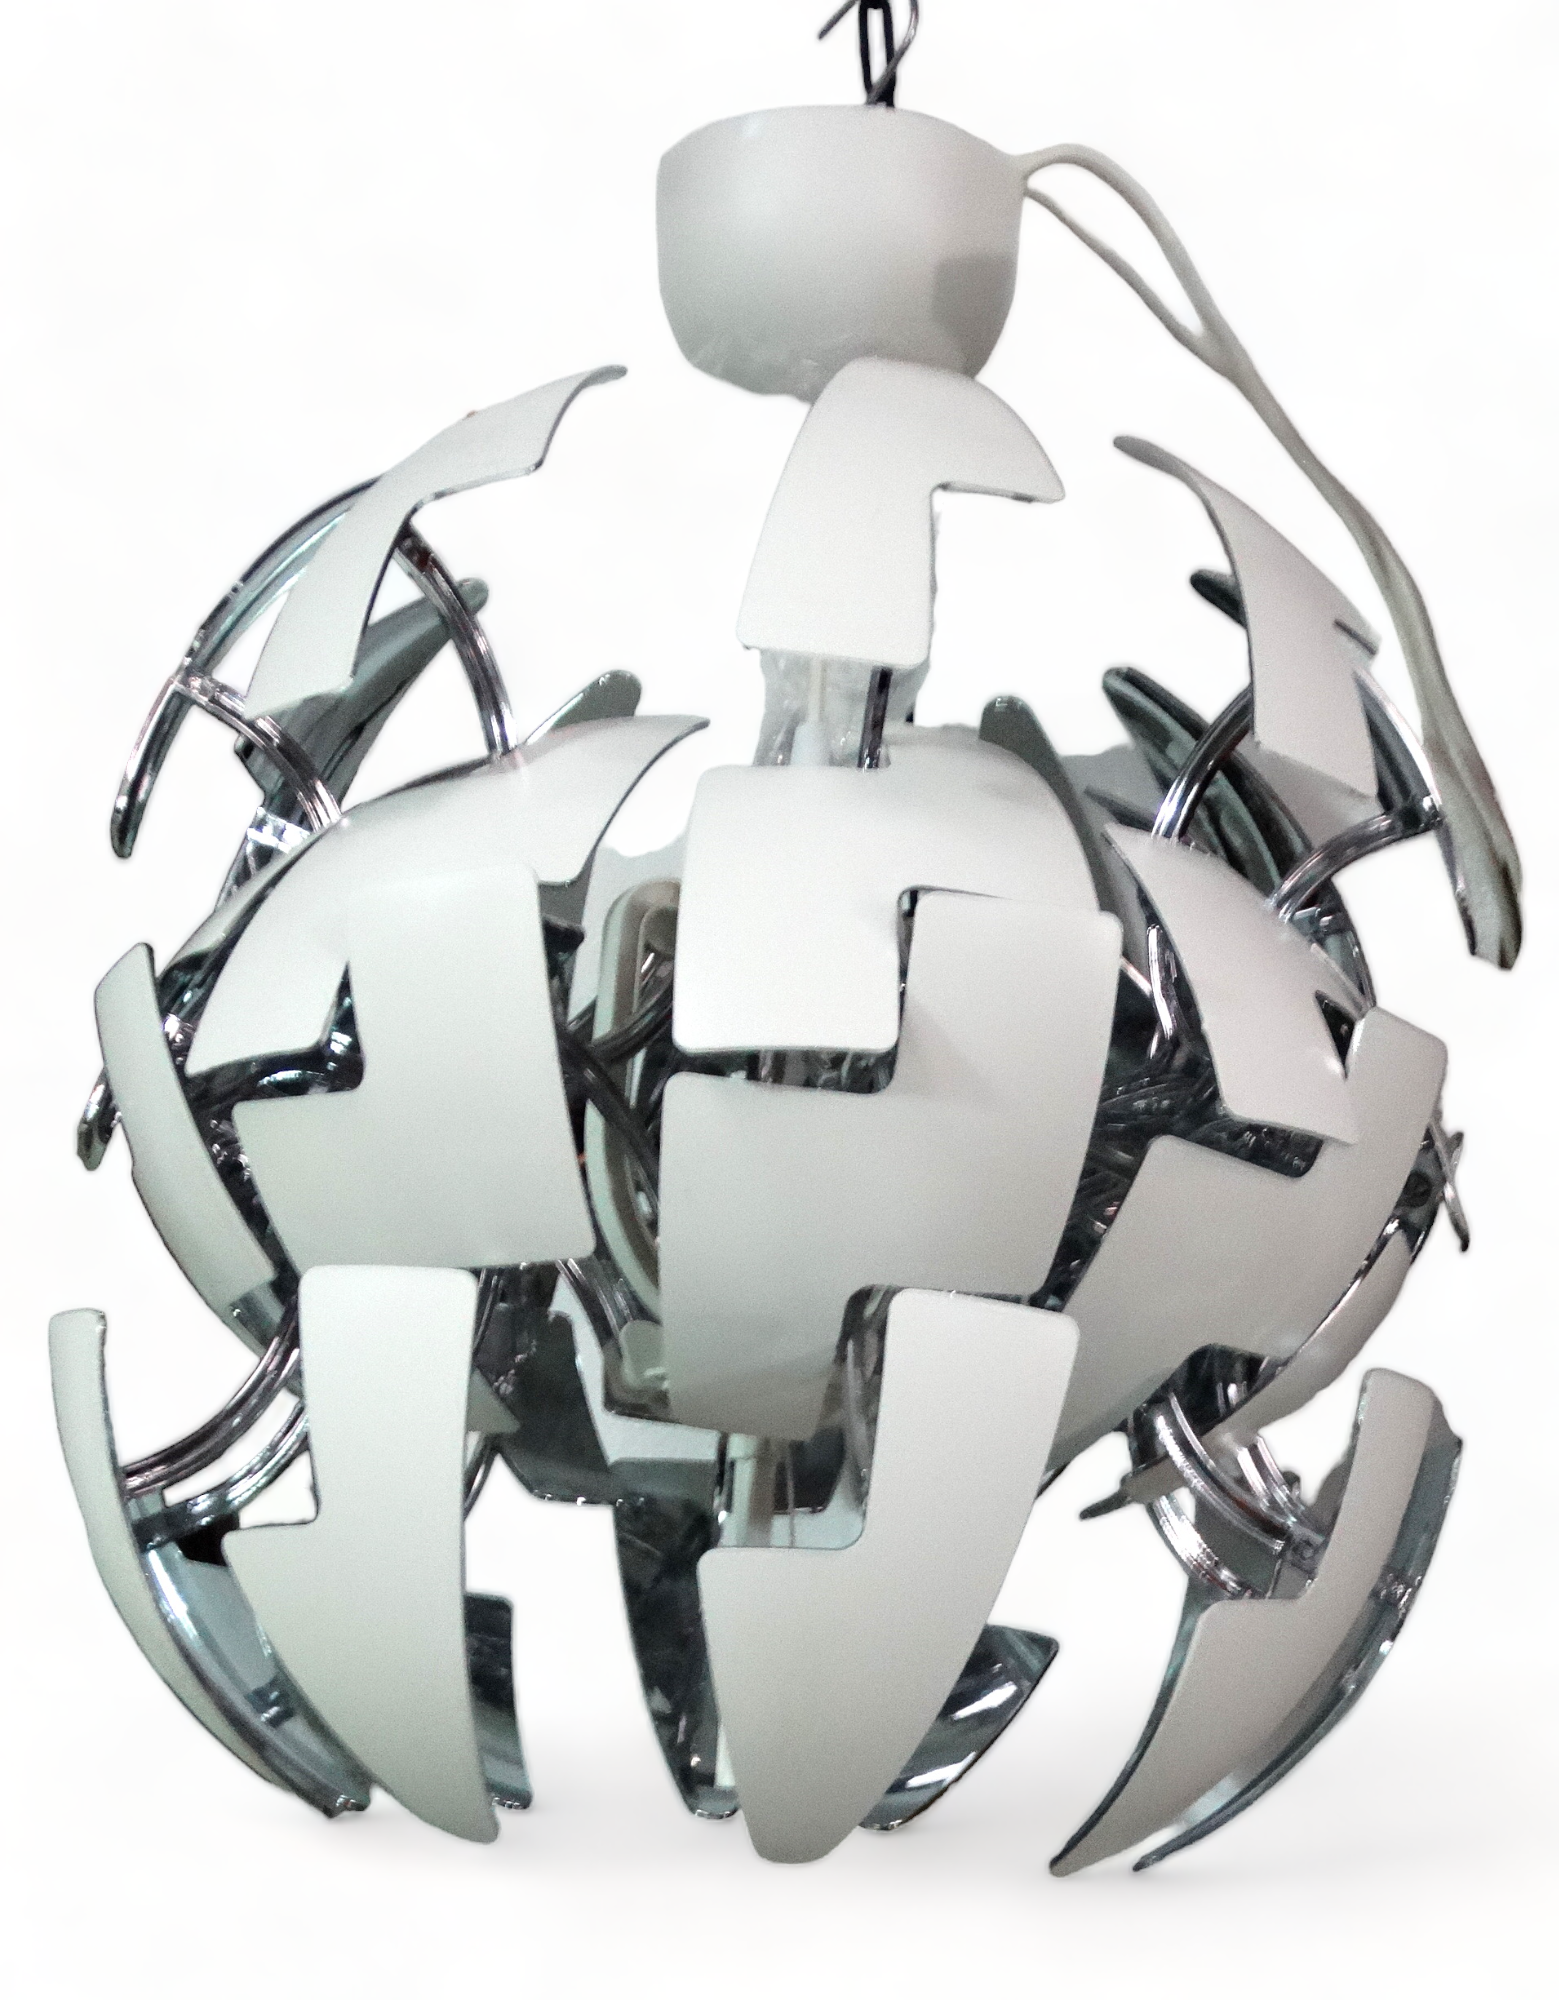 An Ikea white pendant lamp - the globe separating to reveal a mirrored interior, height 35cm. - Image 2 of 3